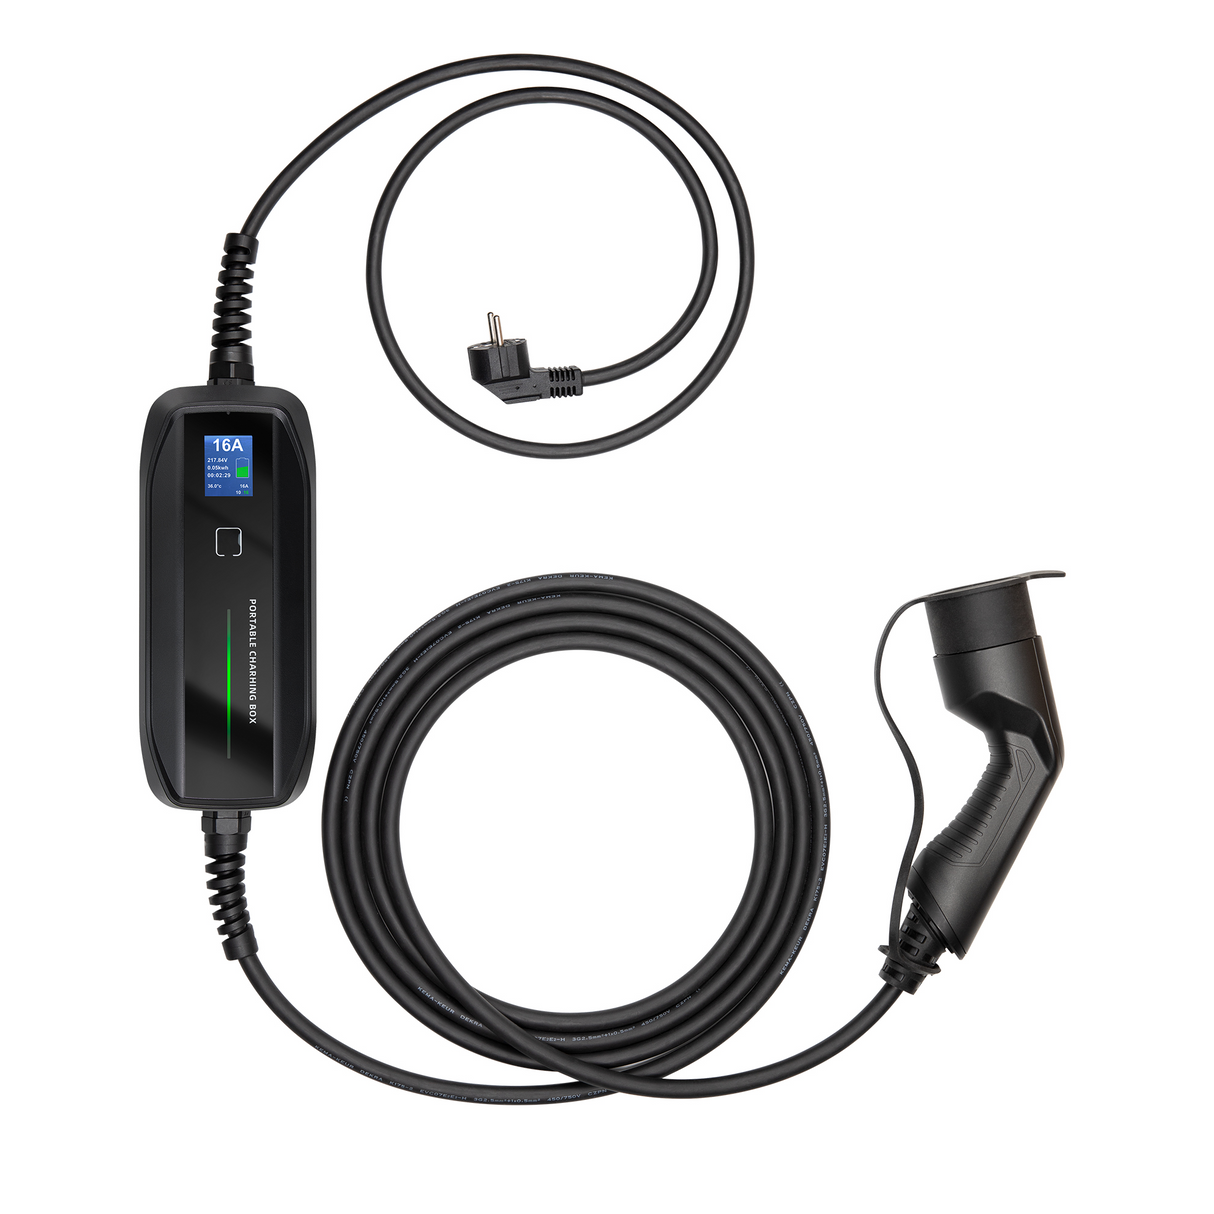 Charger mobile Vinfast VF 9 - Amis de LCD - Type 2 à Schuko